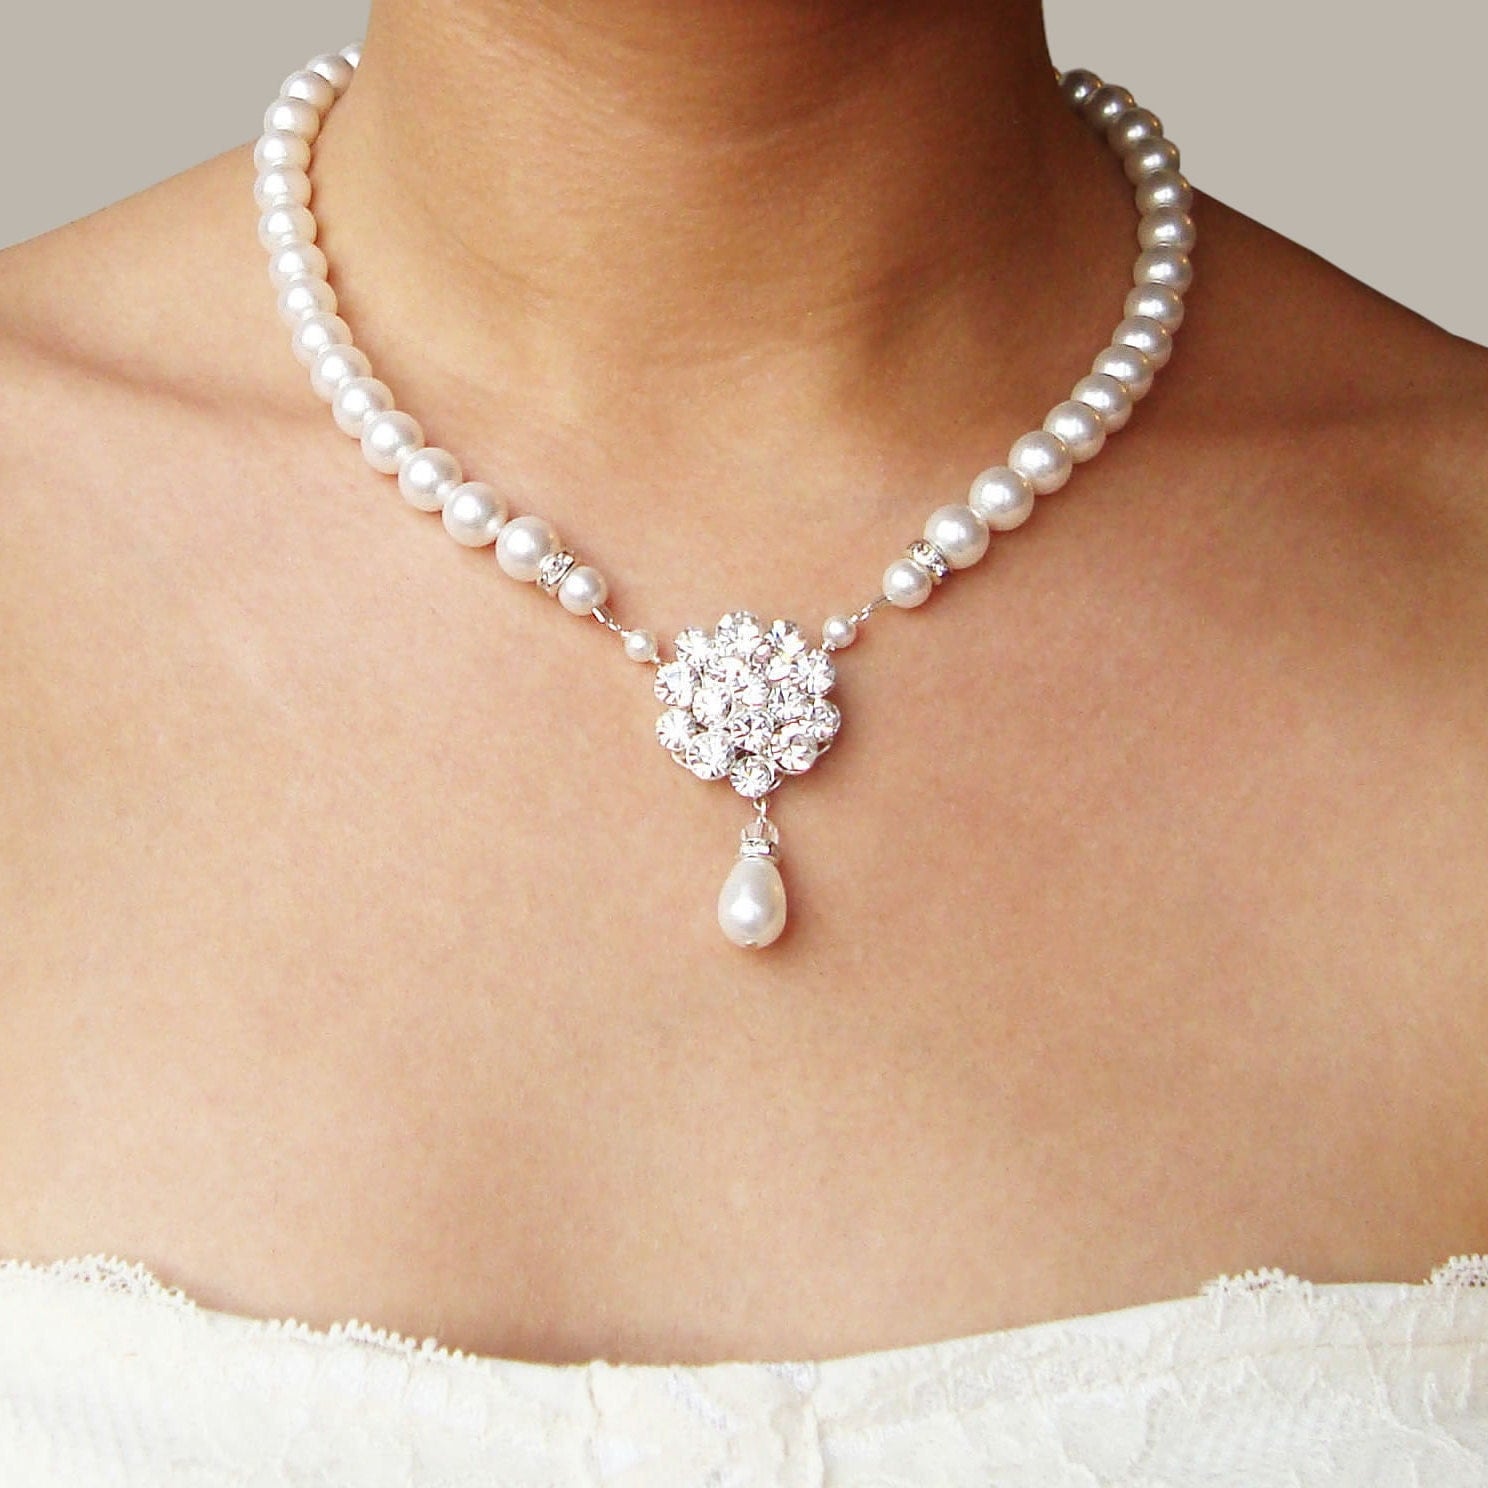 Bridal Pearl Necklace Vintage Style Wedding Necklace by